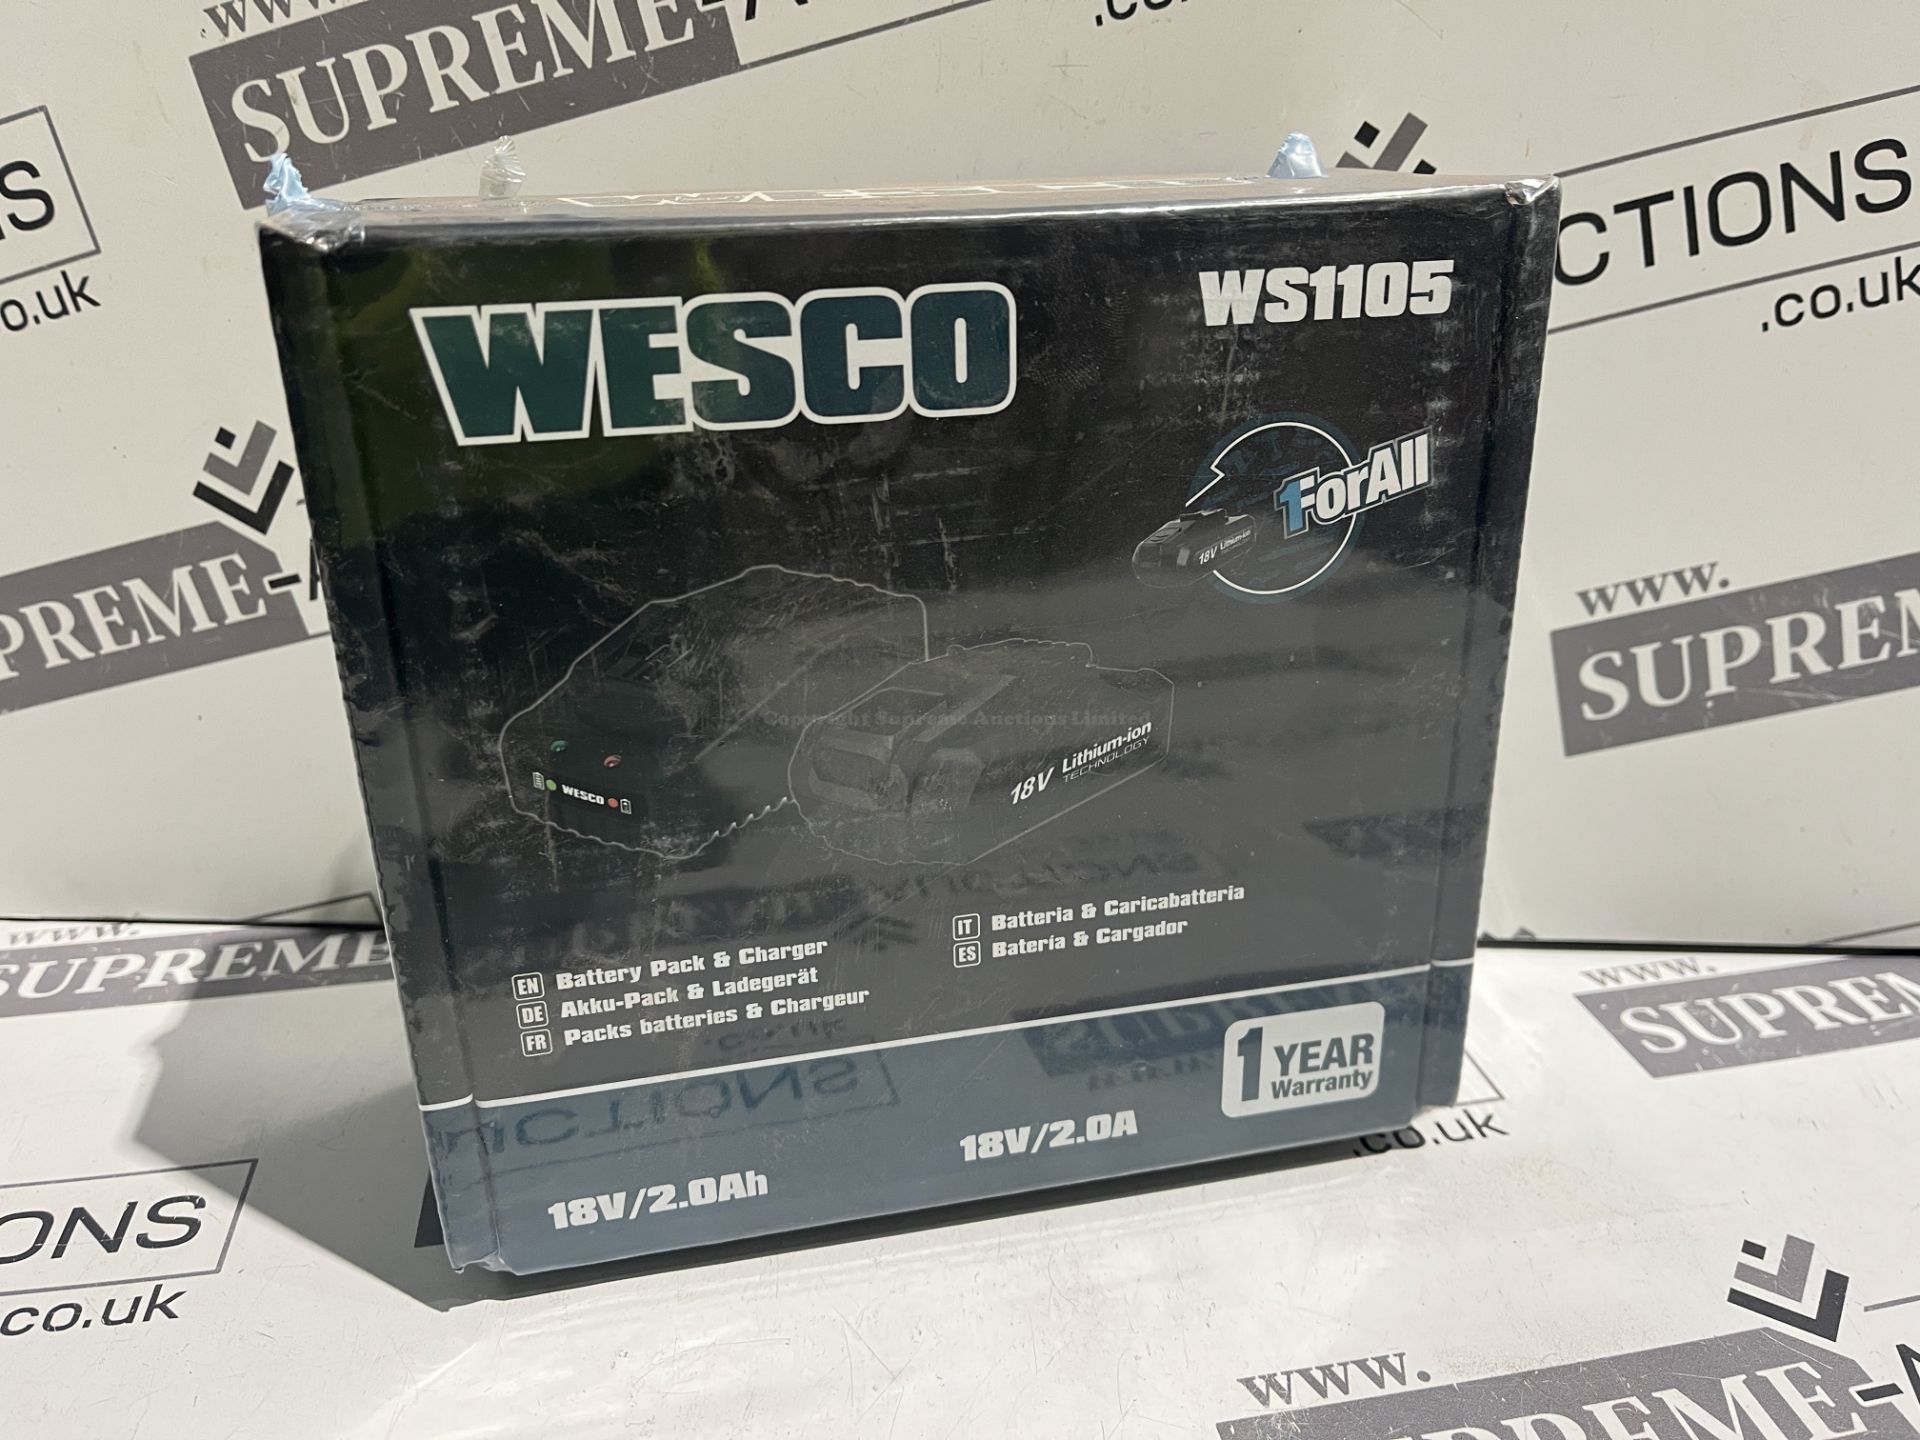 3 X BRAND NEW WESCO BATTERY PACK AND CHARGER KITS 18V 2.0AH R3-7